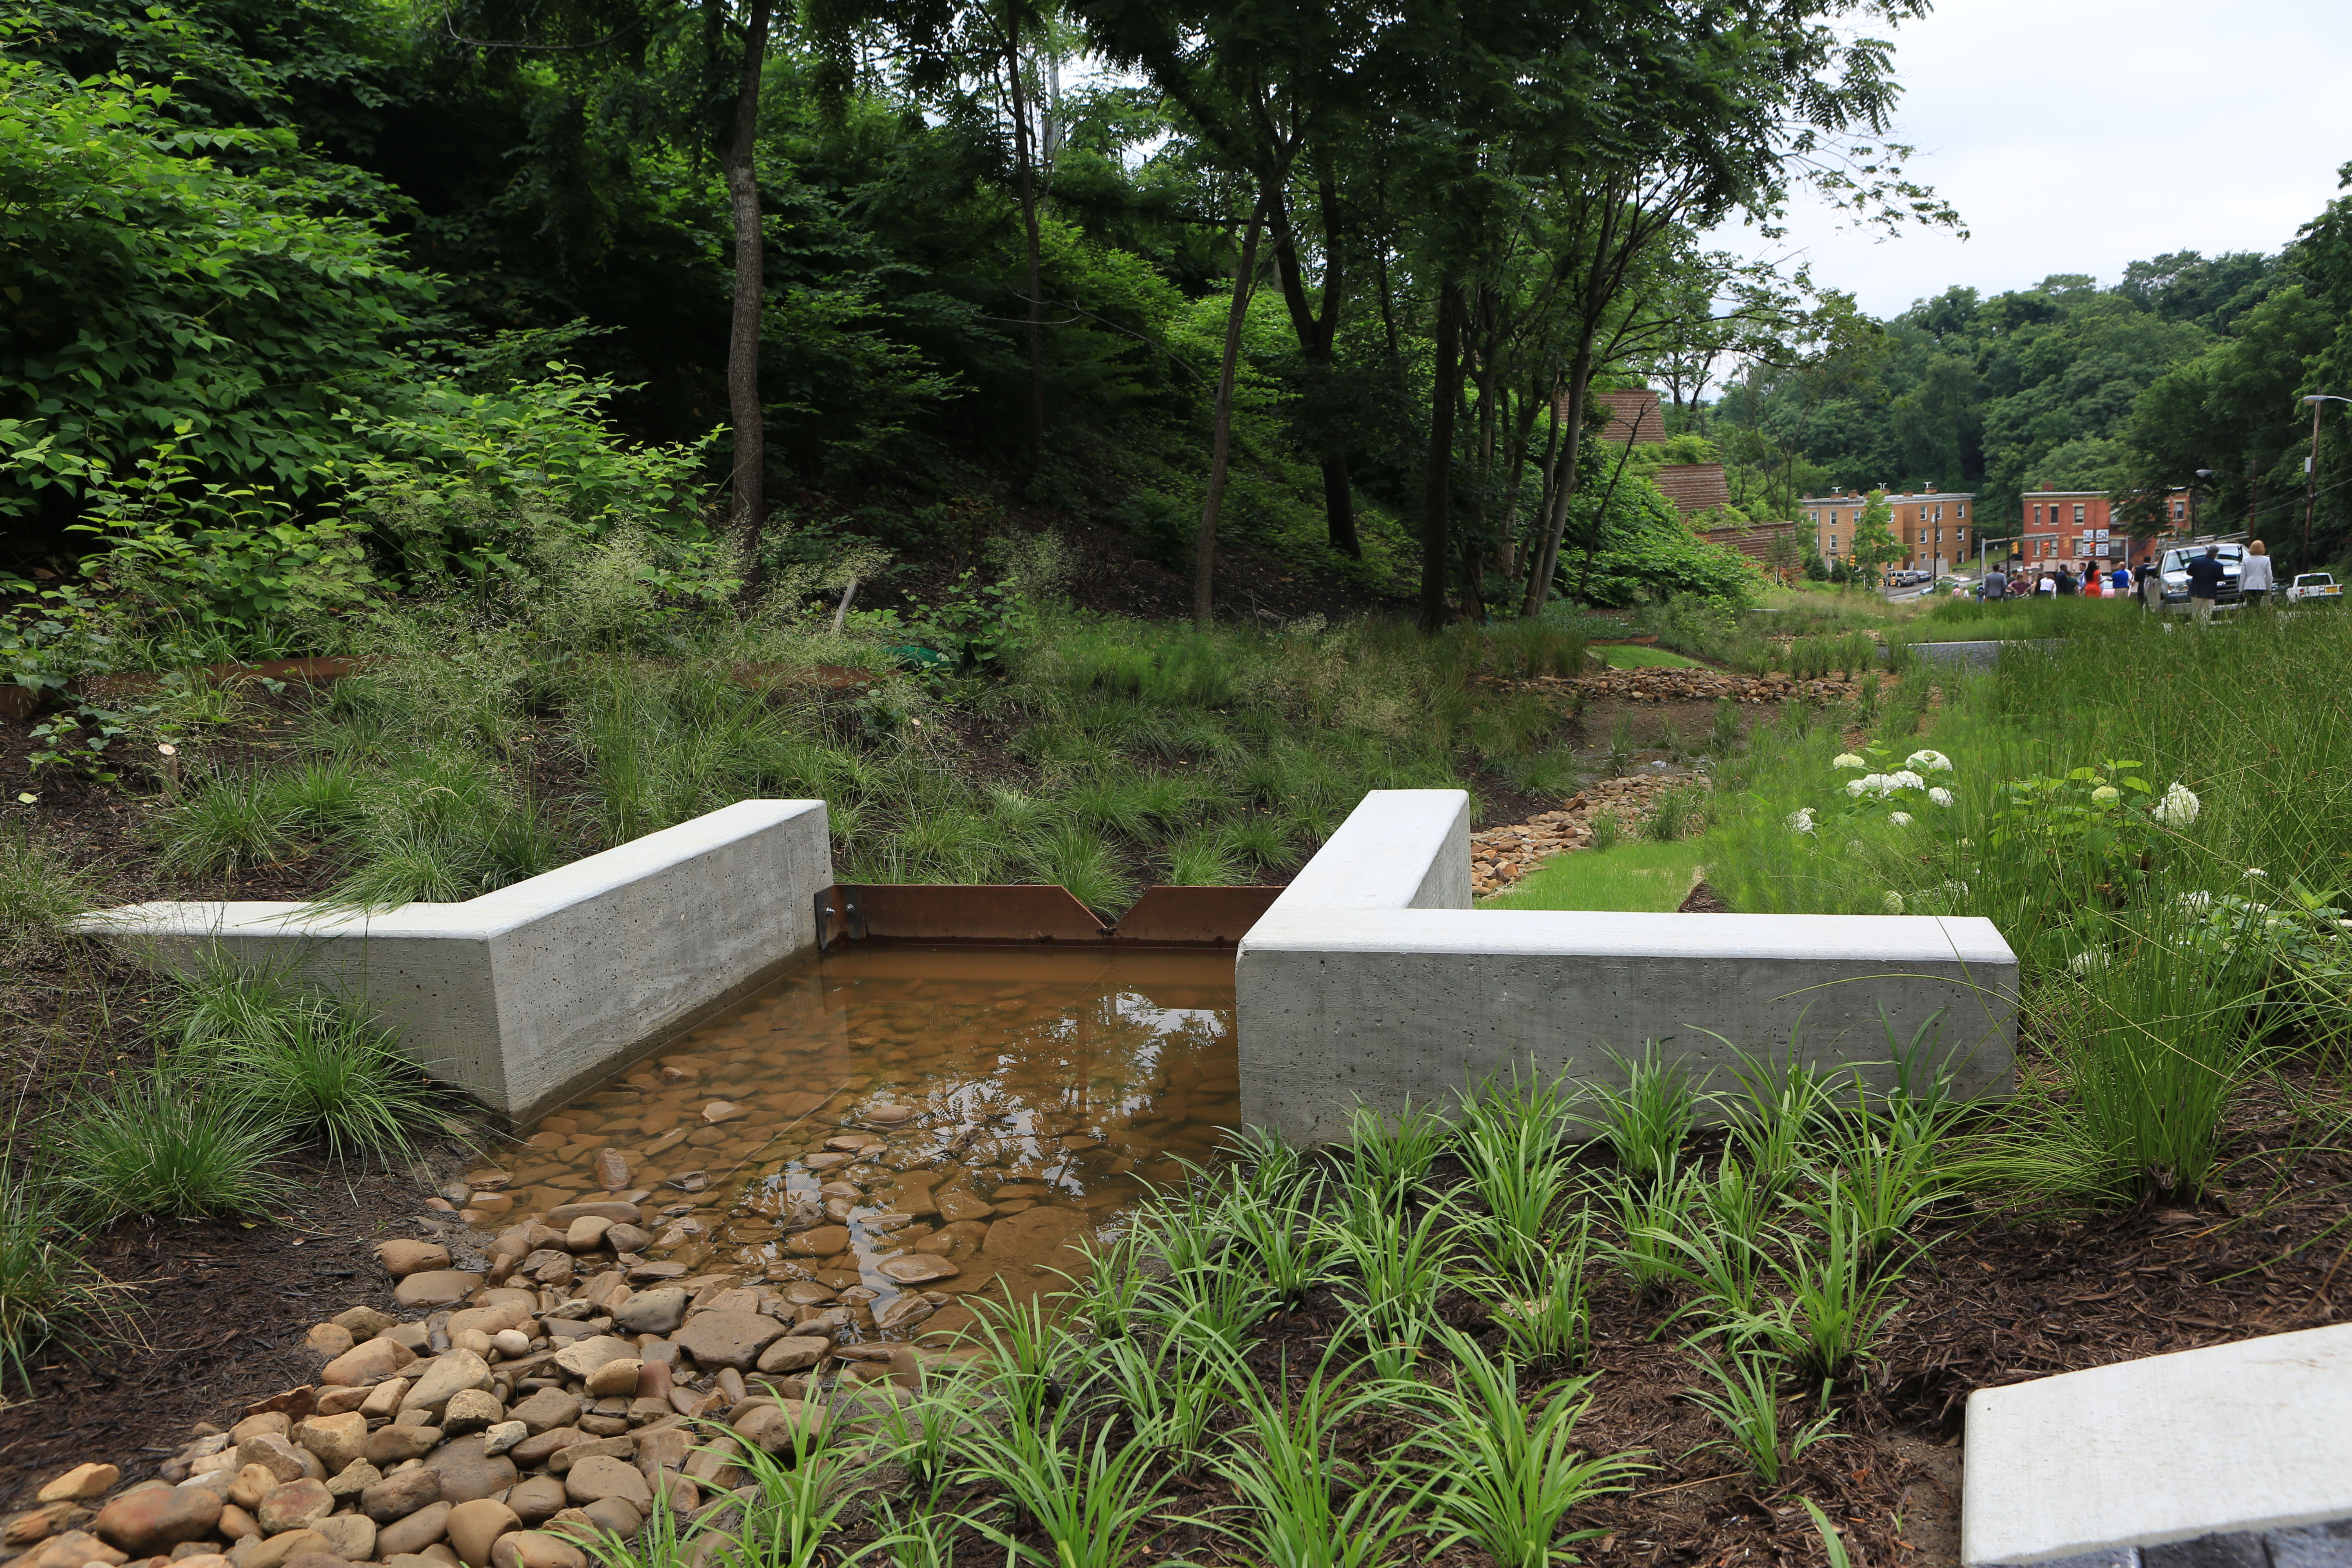 A portion of the Centre and Herron project featuring rainwater flowing into a weir and part of the bioswale.